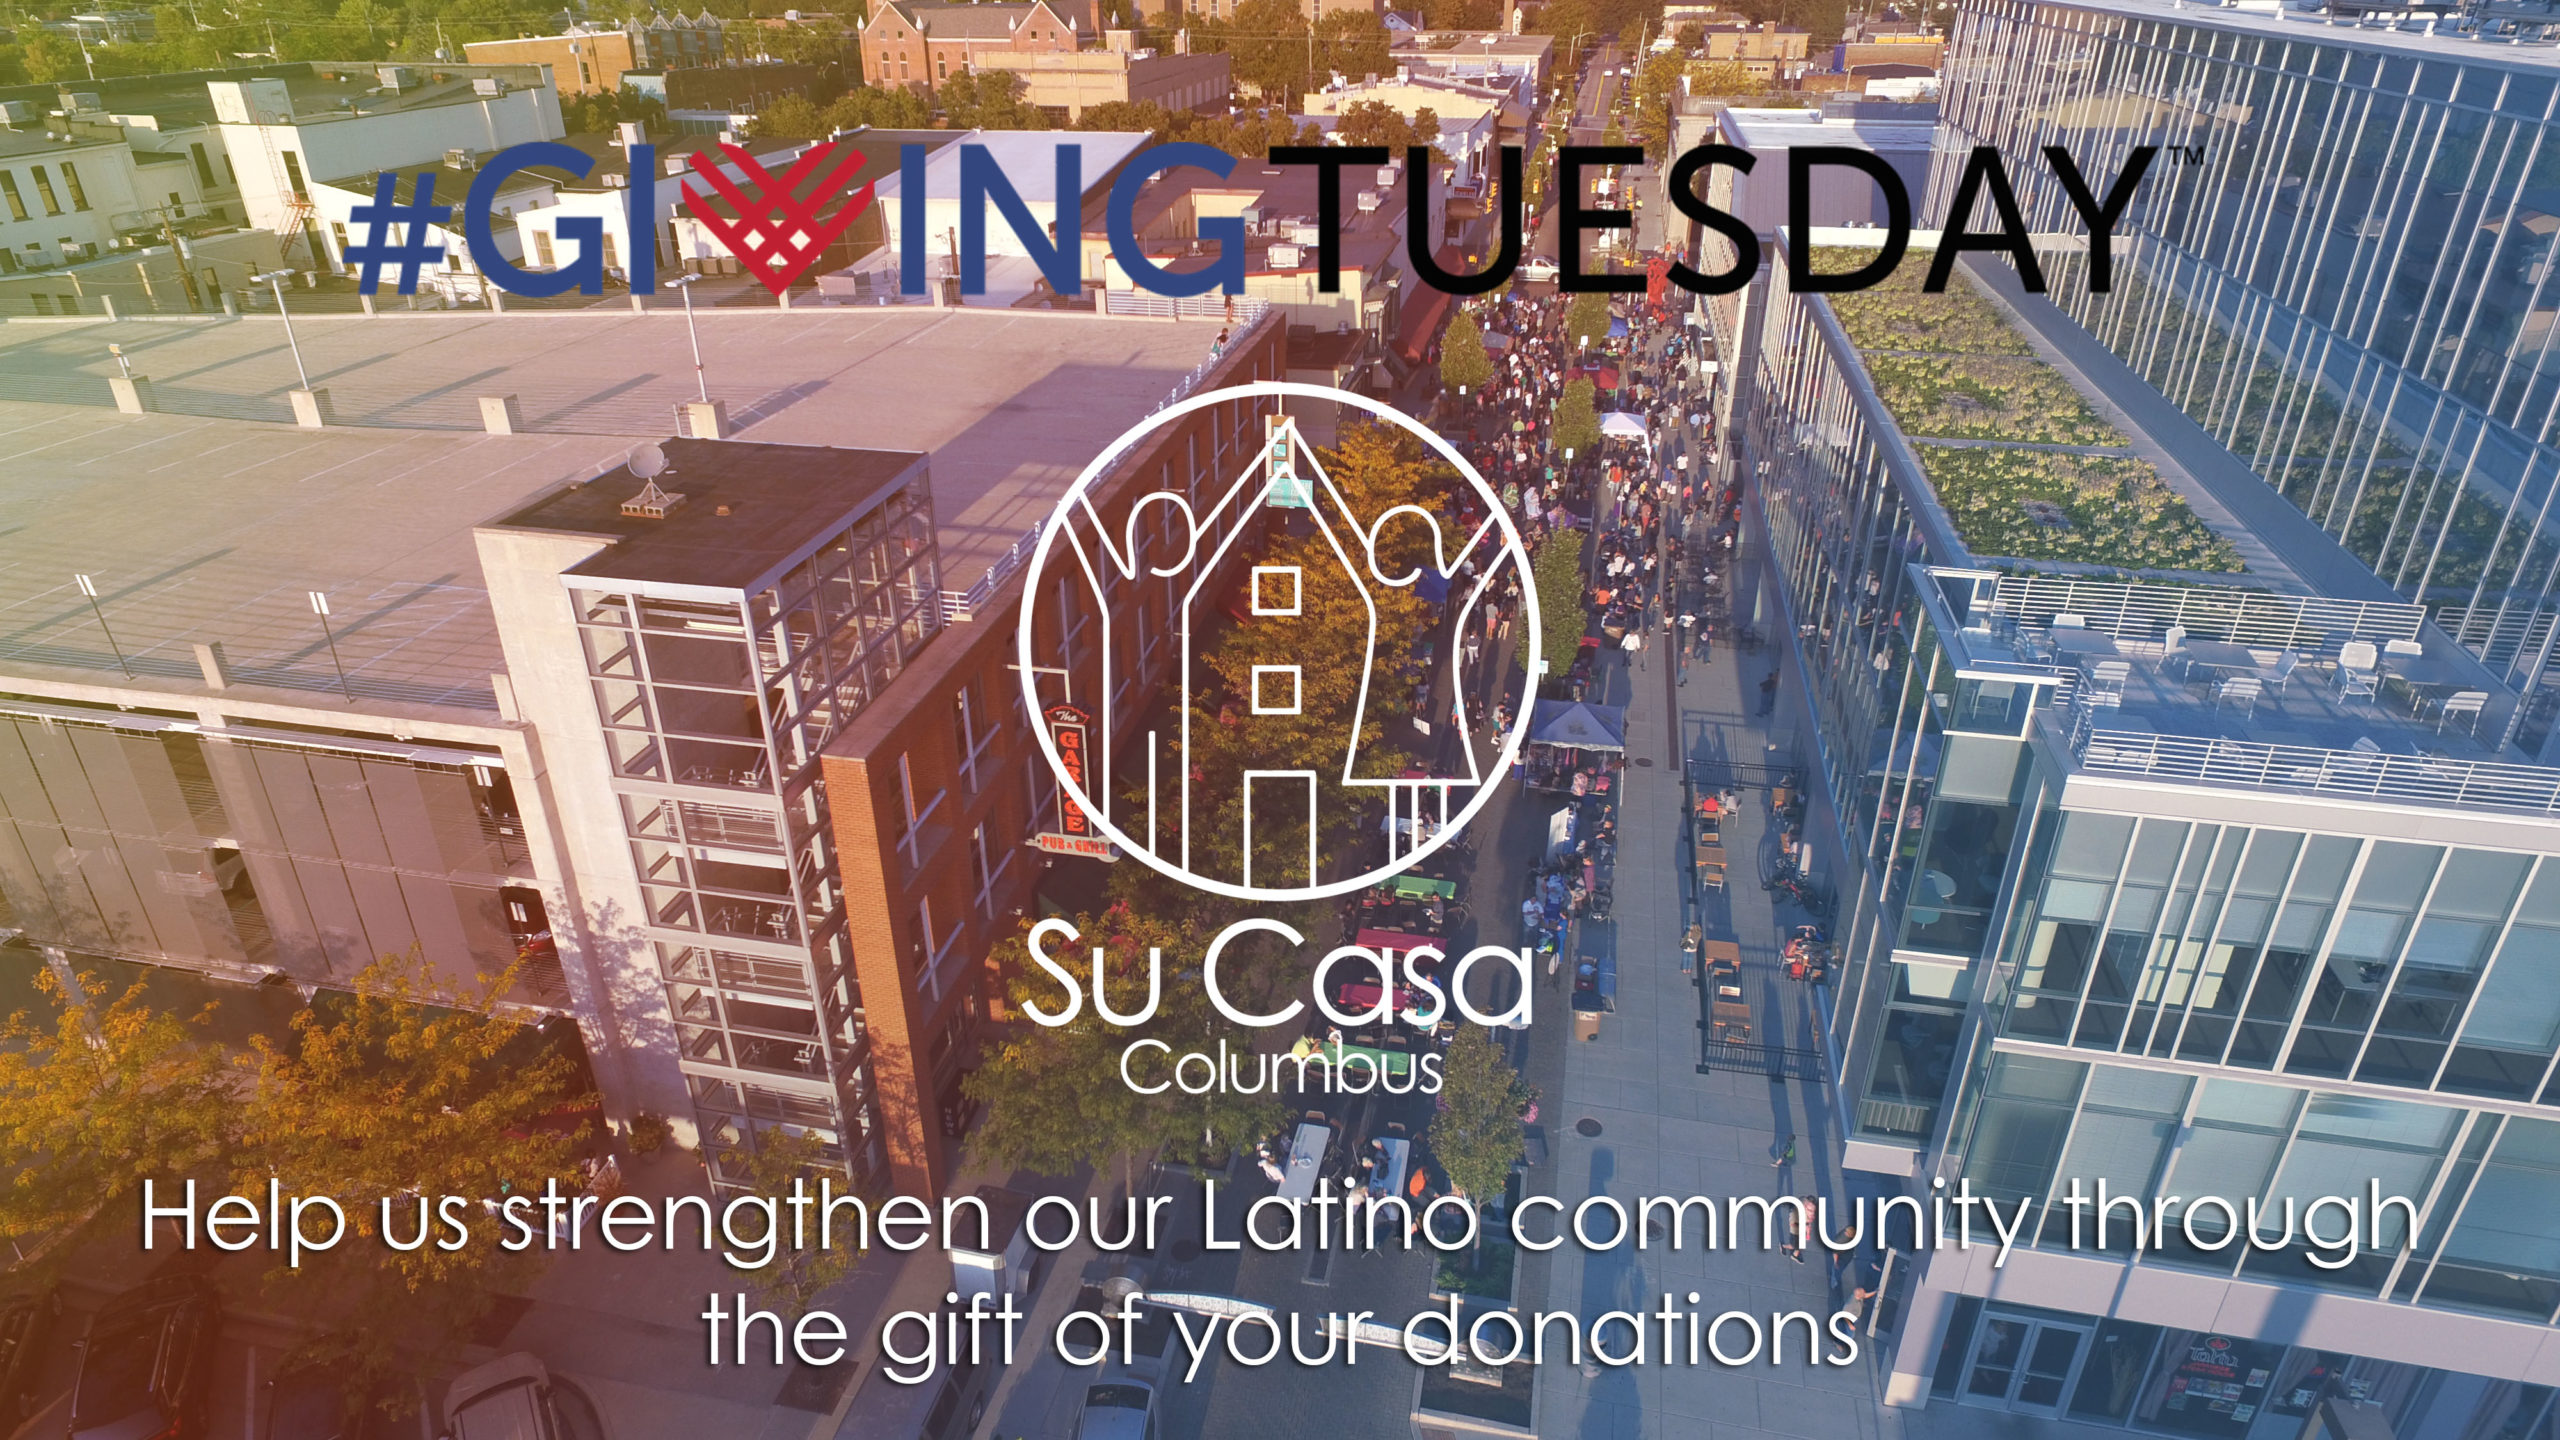 [:en]This #GivingTuesday help us strengthen our Latino community[:]